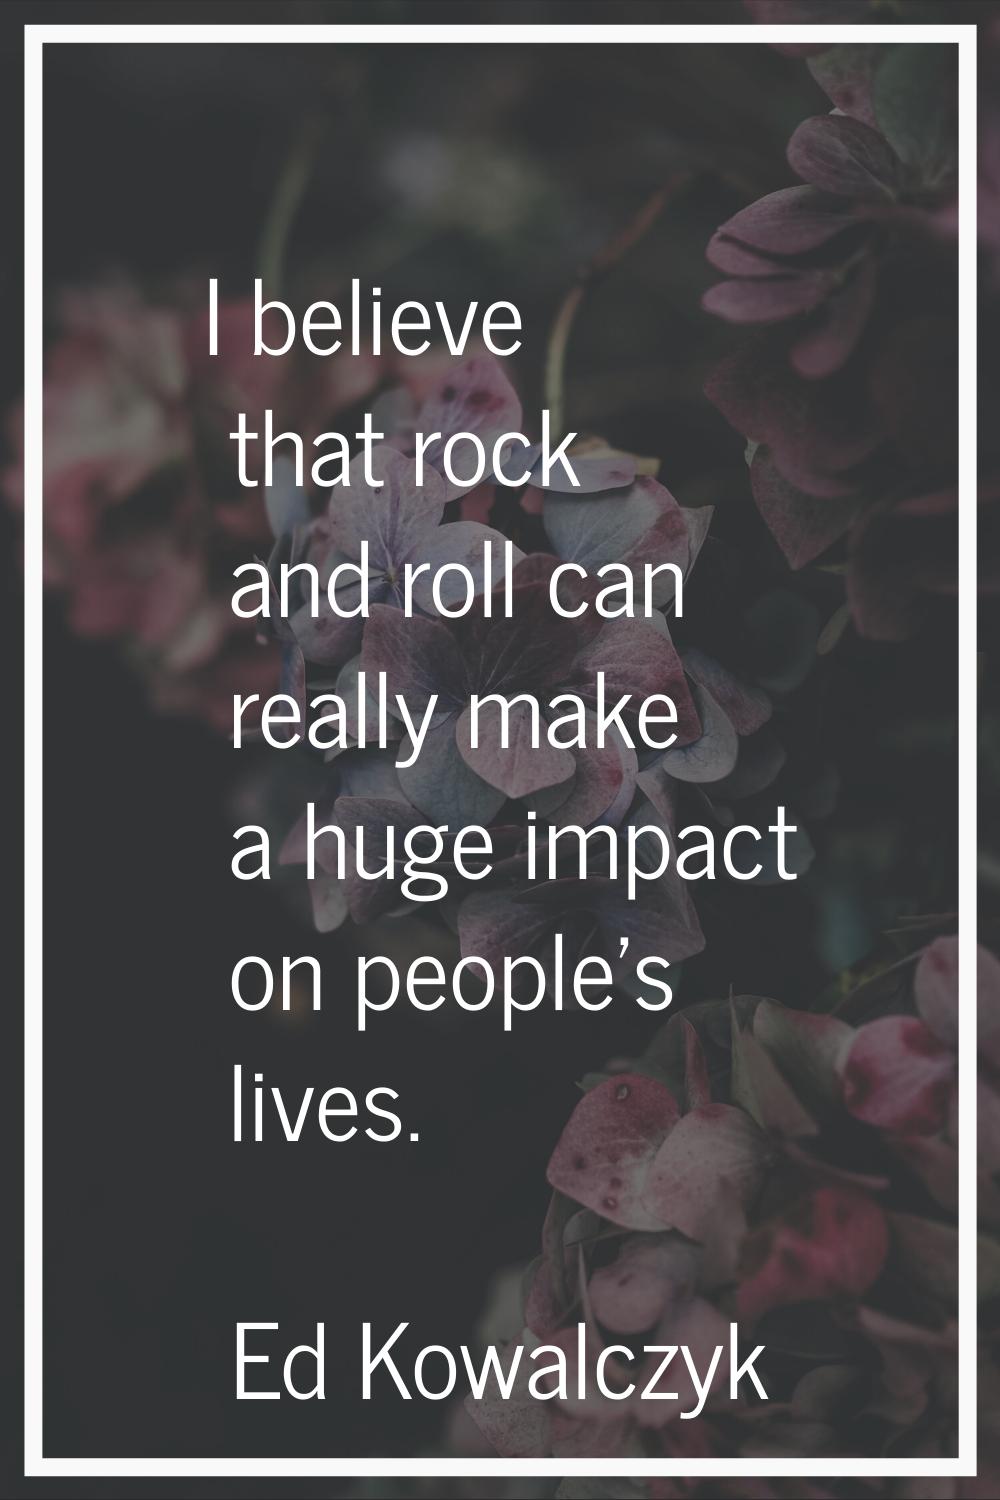 I believe that rock and roll can really make a huge impact on people's lives.